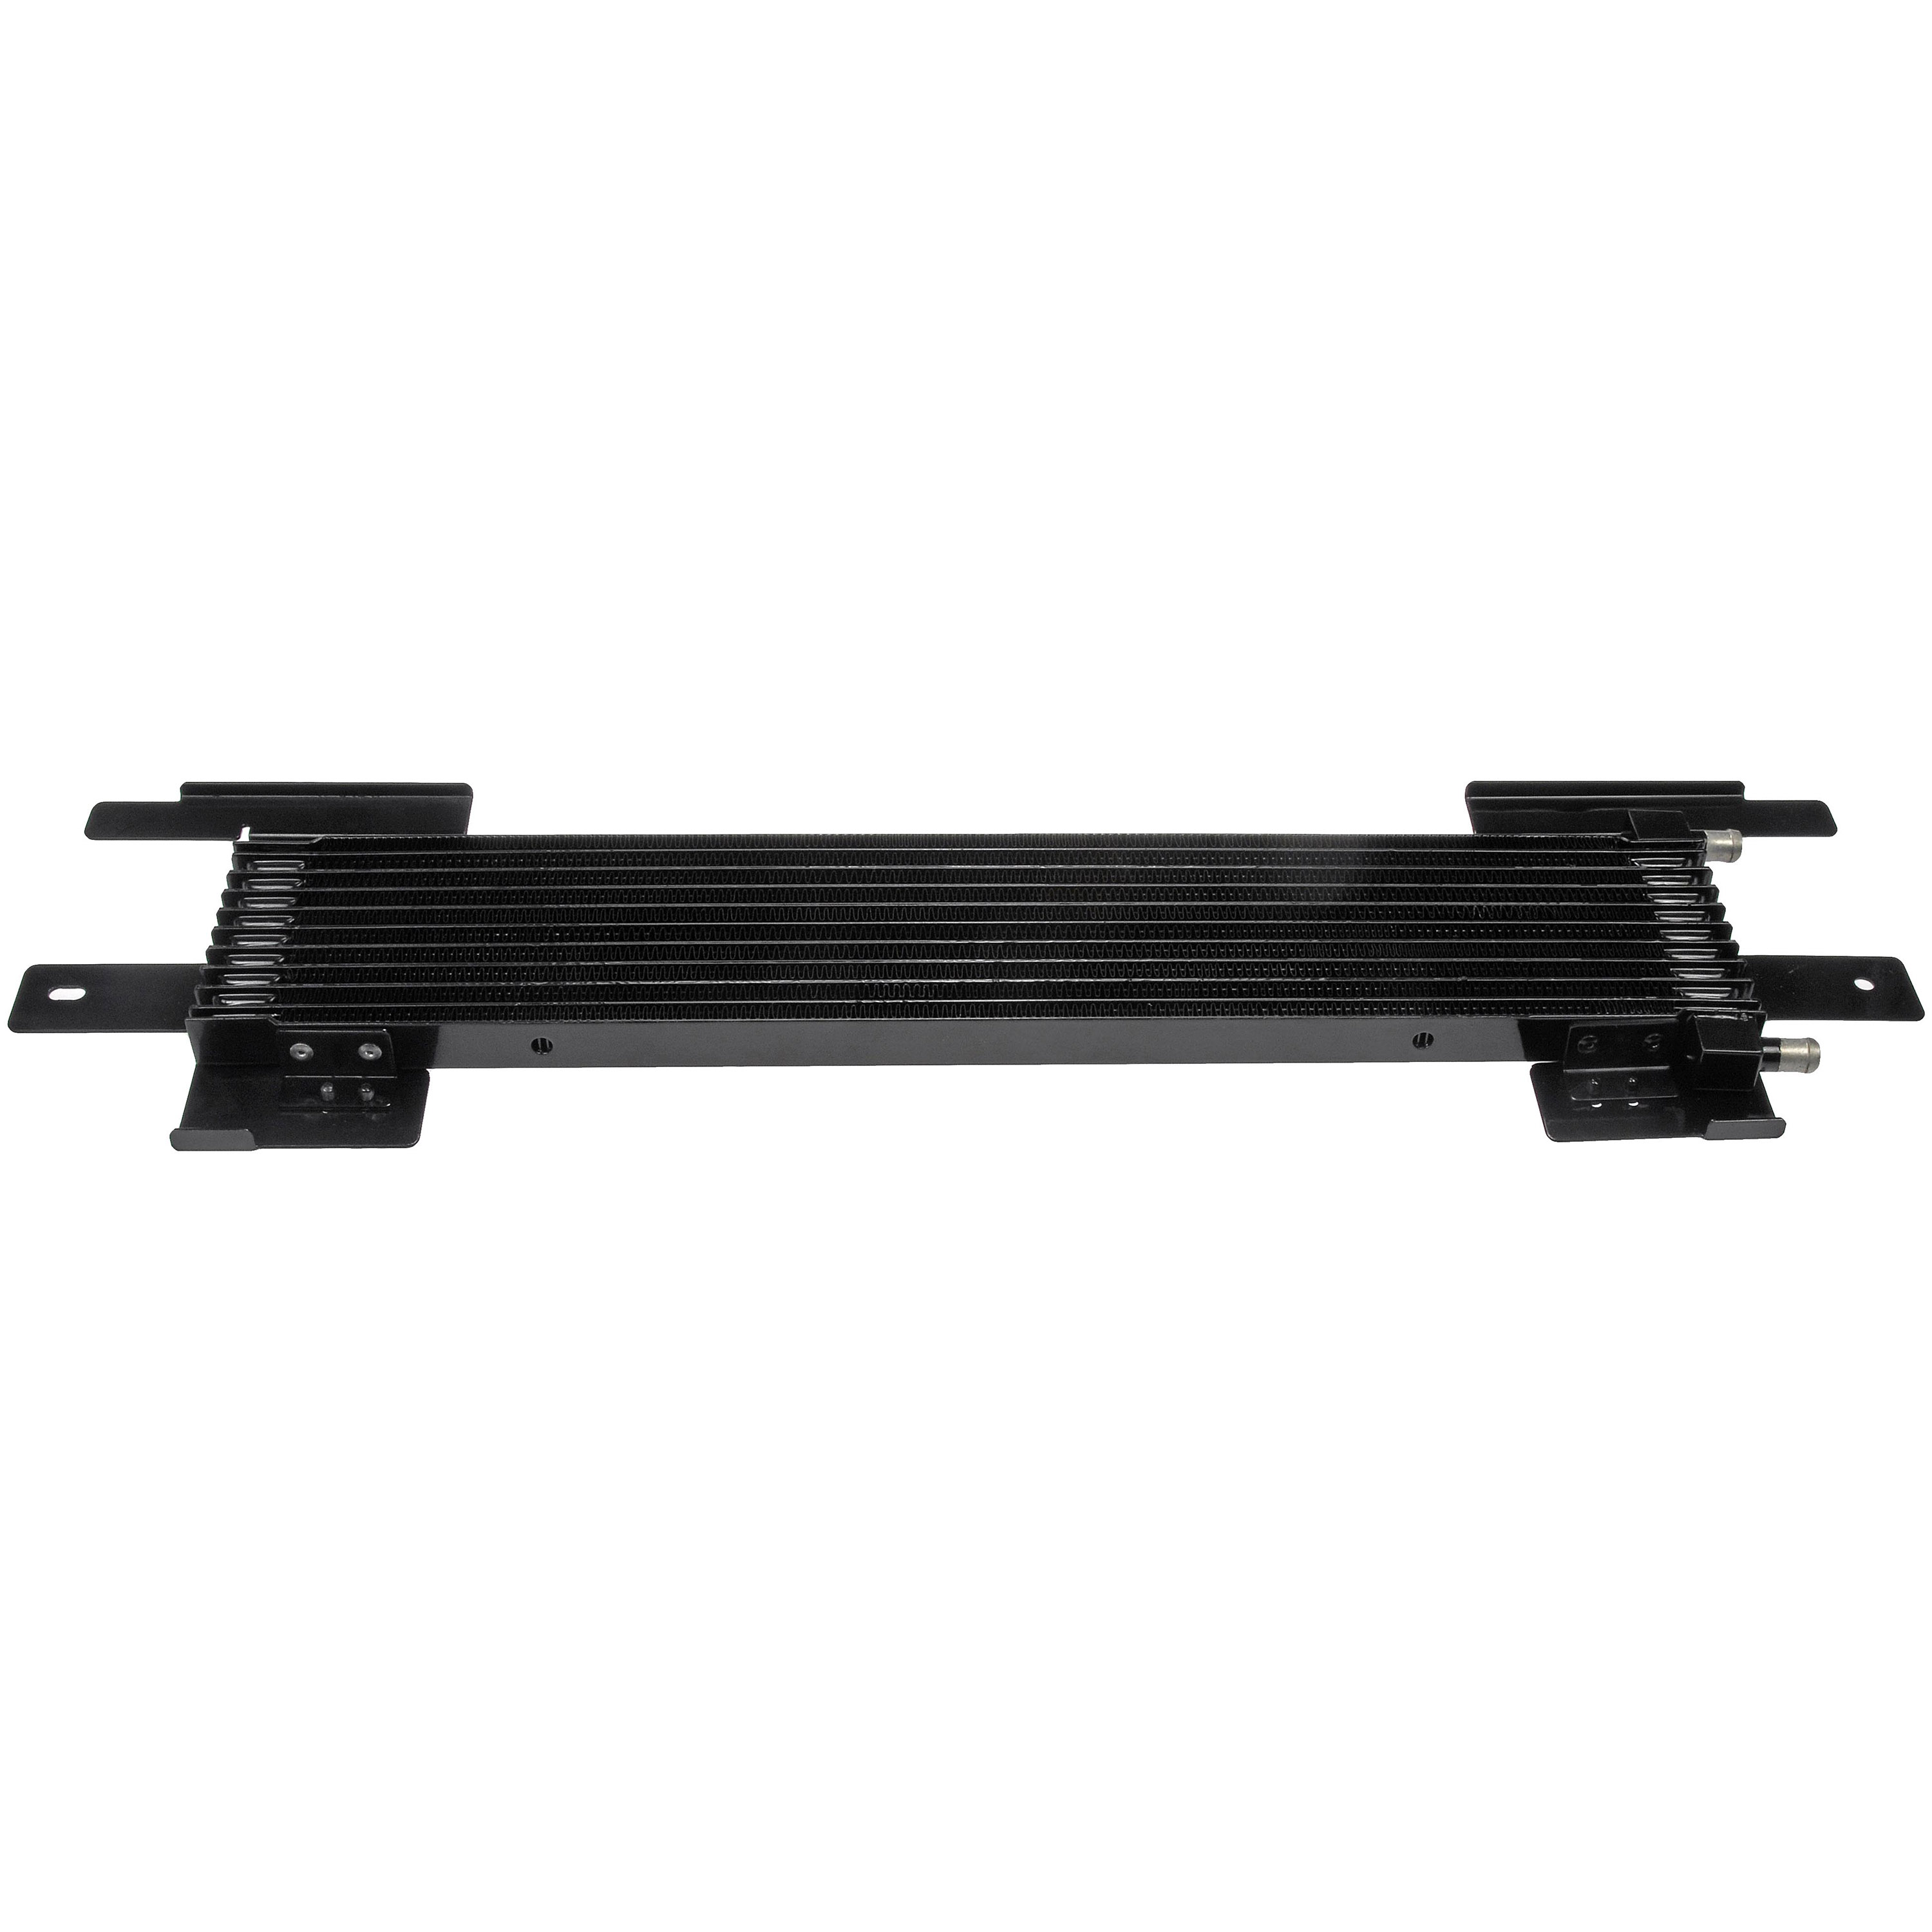 Dorman 918-260 Automatic Transmission Oil Cooler for Specific Ford Models Fits select: 2006-2010 FORD MUSTANG - image 2 of 3